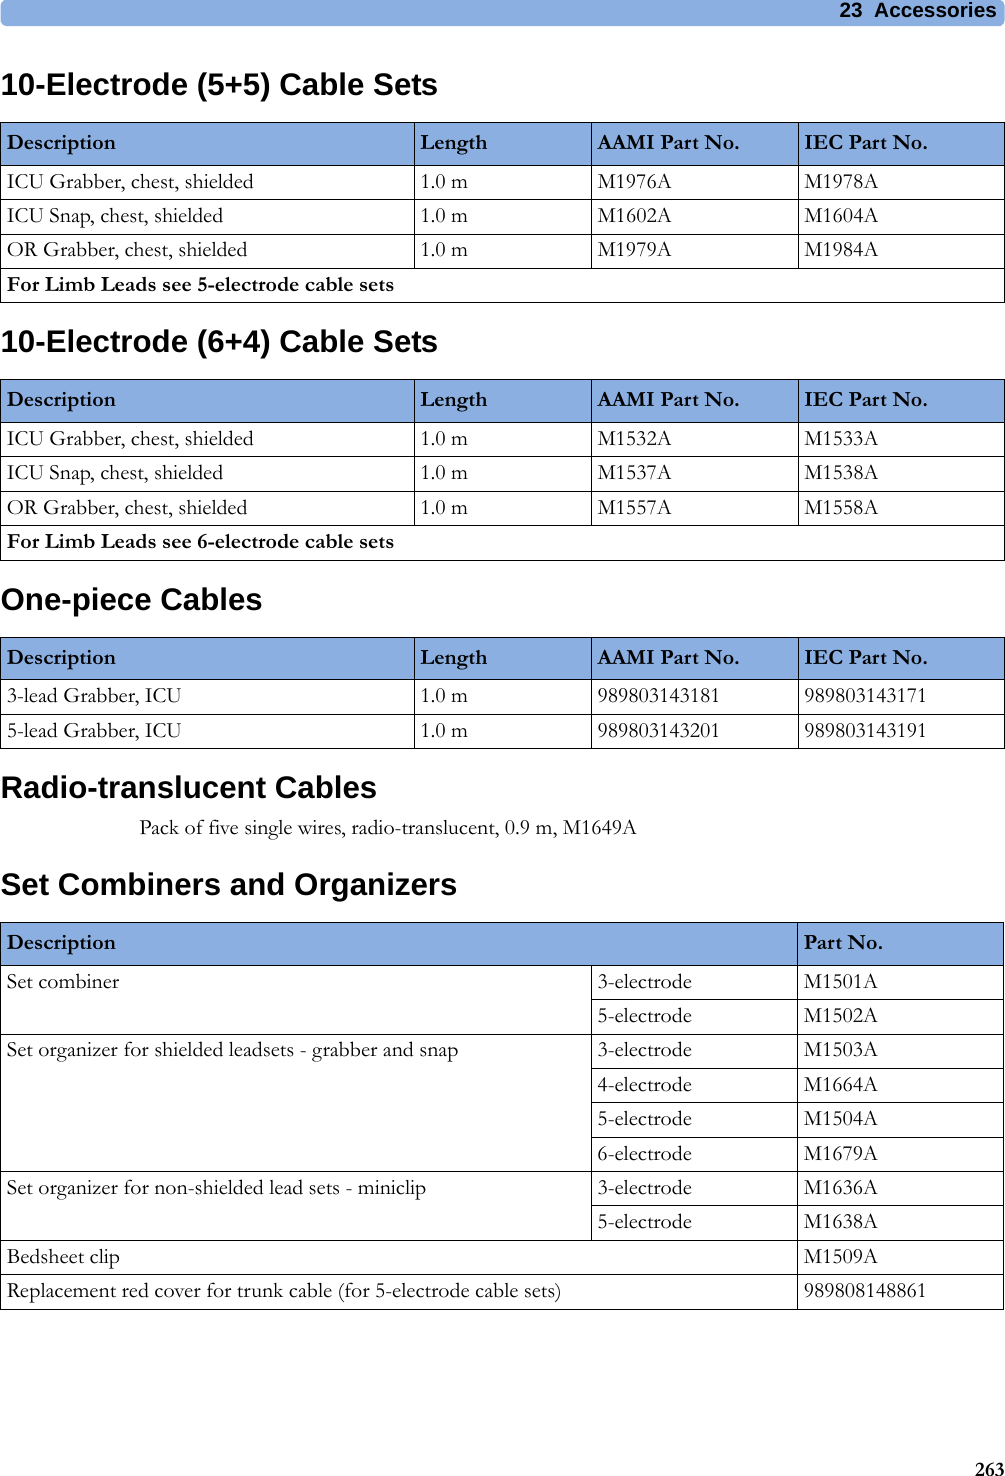 23 Accessories26310-Electrode (5+5) Cable Sets10-Electrode (6+4) Cable SetsOne-piece CablesRadio-translucent CablesPack of five single wires, radio-translucent, 0.9 m, M1649ASet Combiners and OrganizersDescription Length AAMI Part No. IEC Part No.ICU Grabber, chest, shielded 1.0 m M1976A M1978AICU Snap, chest, shielded 1.0 m M1602A M1604AOR Grabber, chest, shielded 1.0 m M1979A M1984AFor Limb Leads see 5-electrode cable setsDescription Length AAMI Part No. IEC Part No.ICU Grabber, chest, shielded 1.0 m M1532A M1533AICU Snap, chest, shielded 1.0 m M1537A M1538AOR Grabber, chest, shielded 1.0 m M1557A M1558AFor Limb Leads see 6-electrode cable setsDescription Length AAMI Part No. IEC Part No.3-lead Grabber, ICU 1.0 m 989803143181 9898031431715-lead Grabber, ICU 1.0 m 989803143201 989803143191Description Part No.Set combiner 3-electrode M1501A5-electrode M1502ASet organizer for shielded leadsets - grabber and snap 3-electrode M1503A4-electrode M1664A5-electrode M1504A6-electrode M1679ASet organizer for non-shielded lead sets - miniclip 3-electrode M1636A5-electrode M1638ABedsheet clip M1509AReplacement red cover for trunk cable (for 5-electrode cable sets) 989808148861